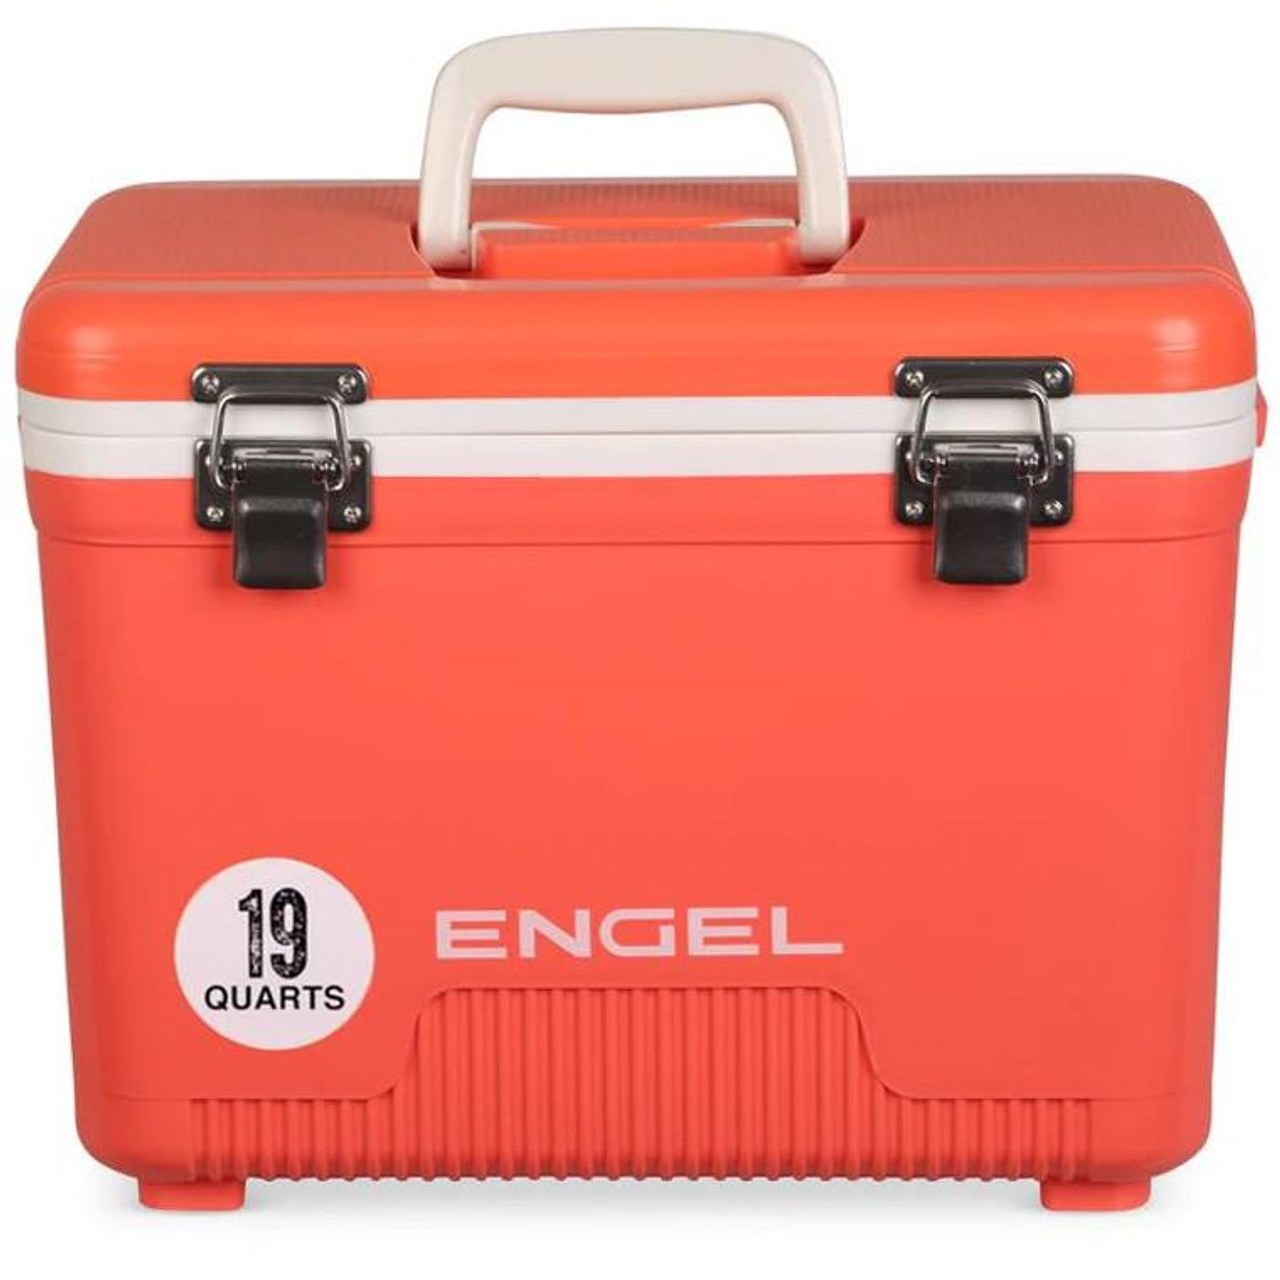 Engel Cooler Dry Box Coral - Simmons Sporting Goods